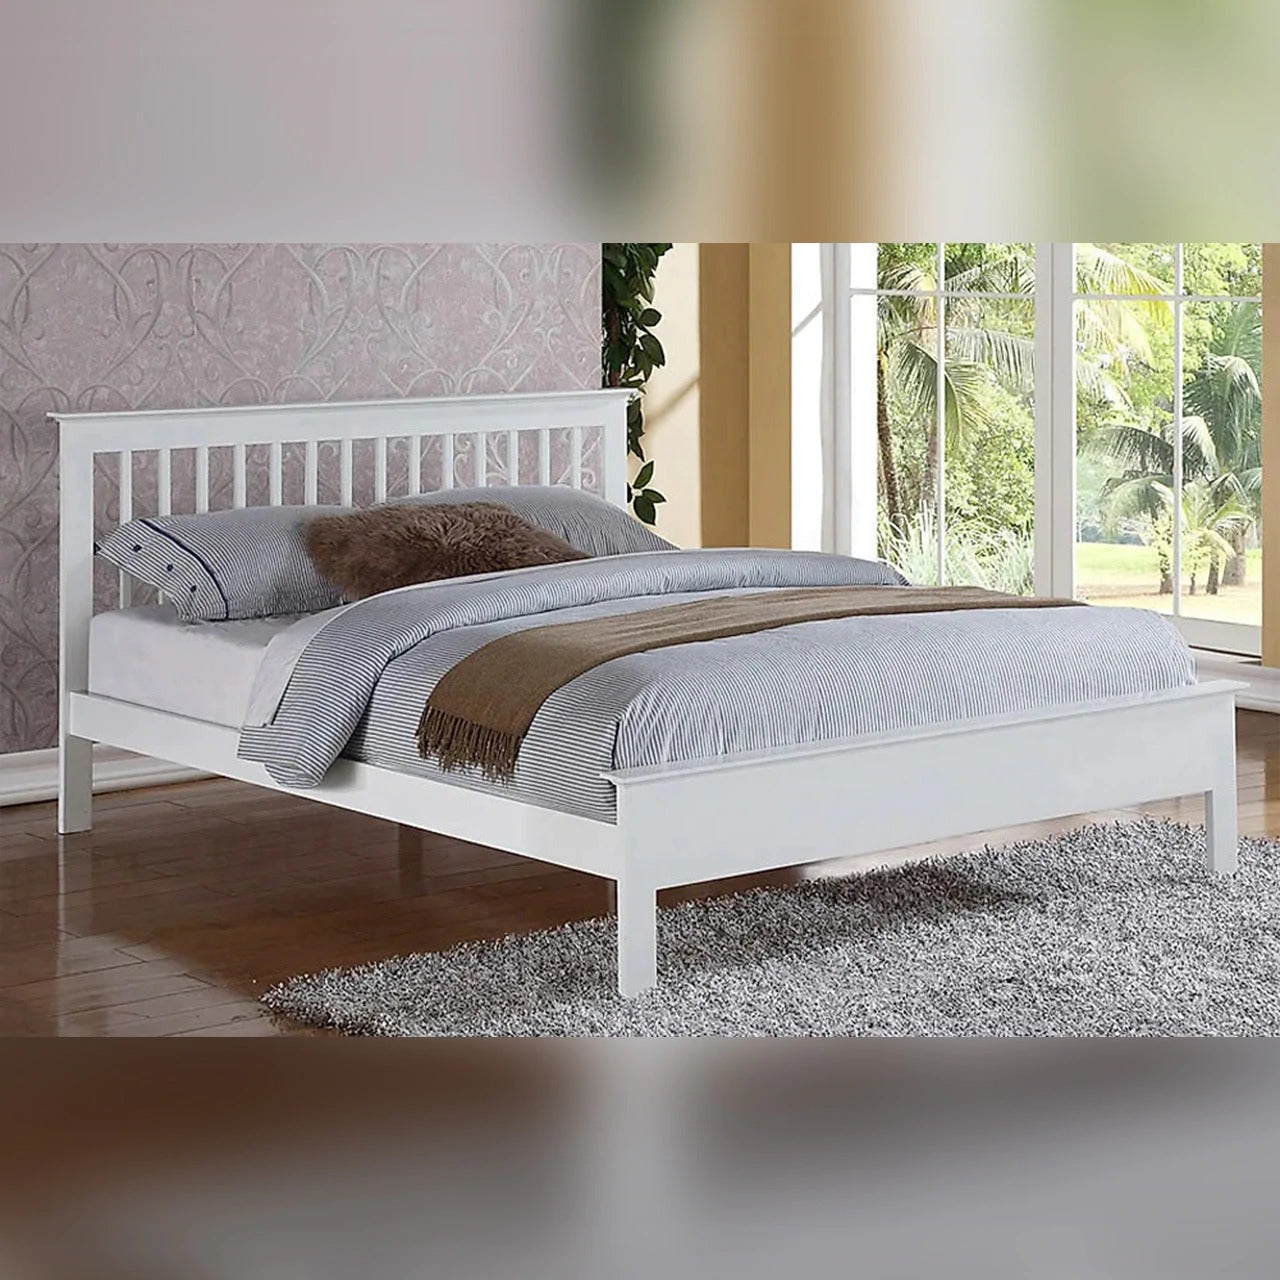 King Size Bed, King Size Cot, King Size Bed With Storage, King Bed